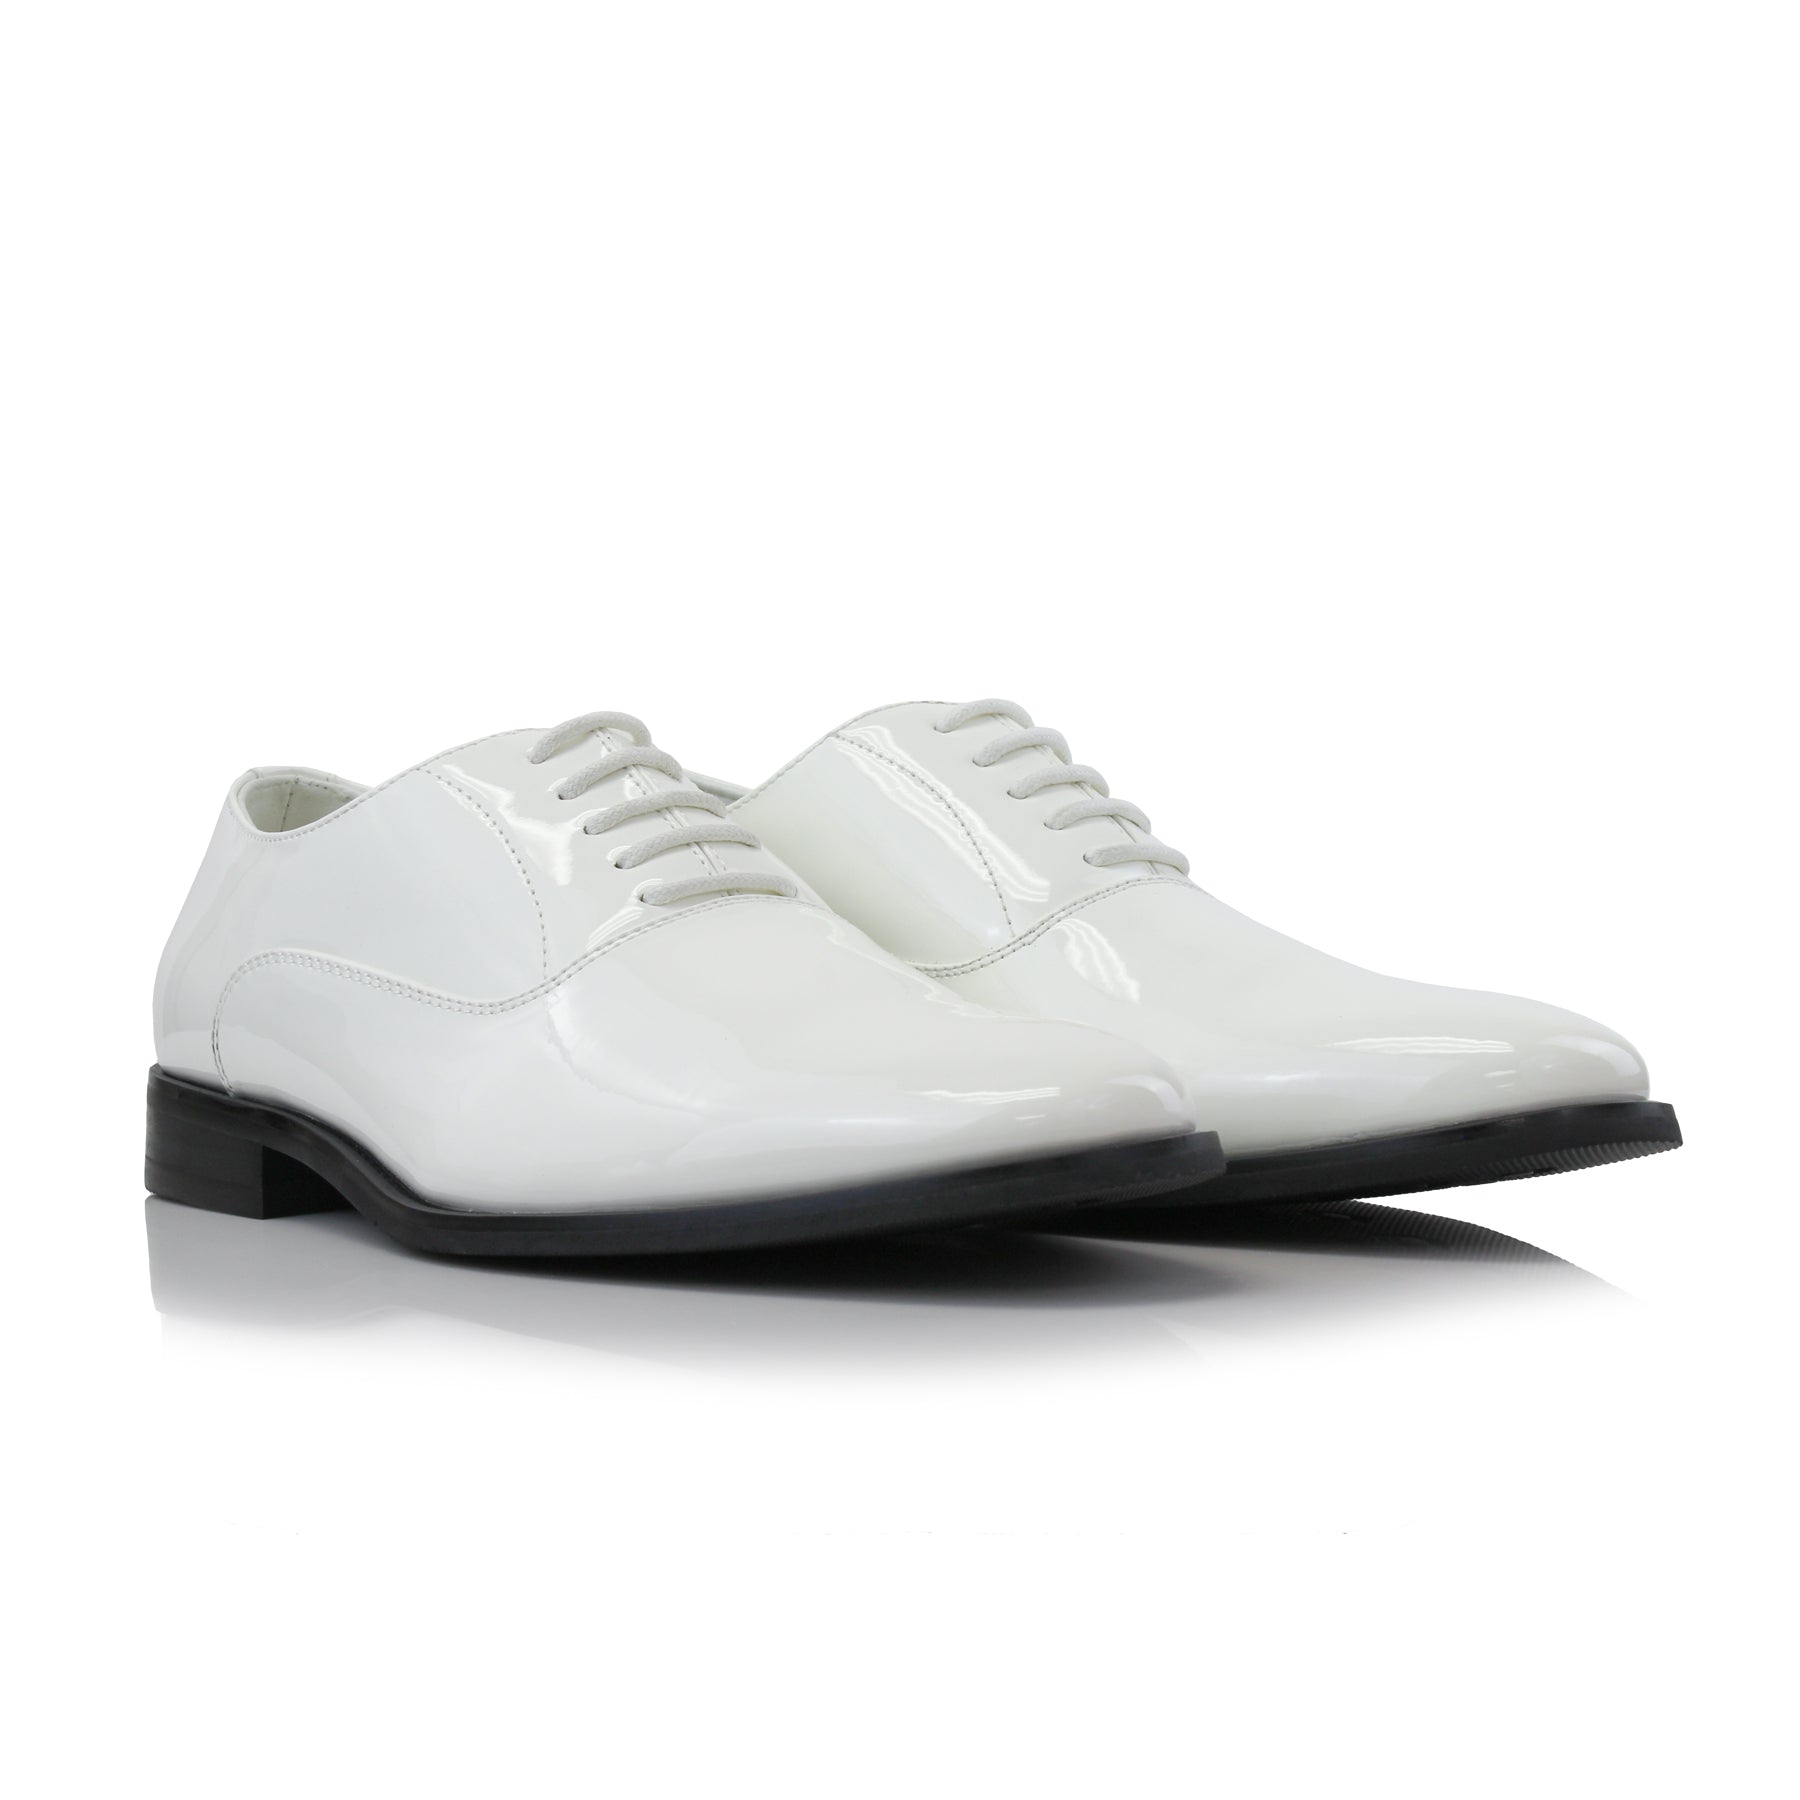 Faux Patent Leather Oxfords | George by Ferro Aldo | Conal Footwear | Paired Angle View